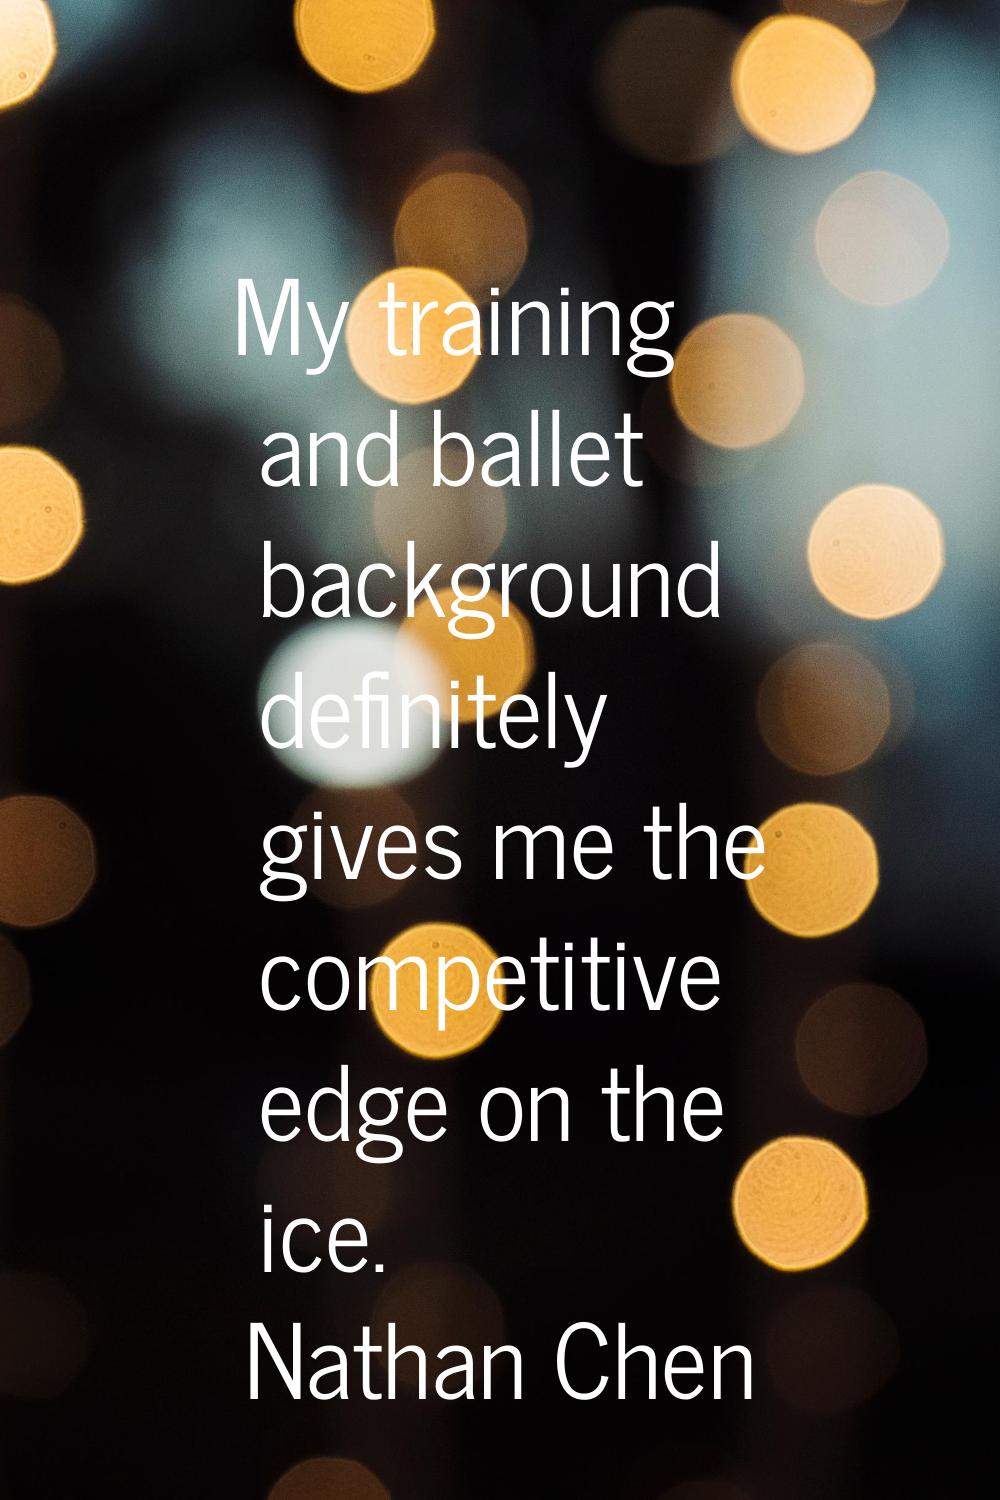 My training and ballet background definitely gives me the competitive edge on the ice.